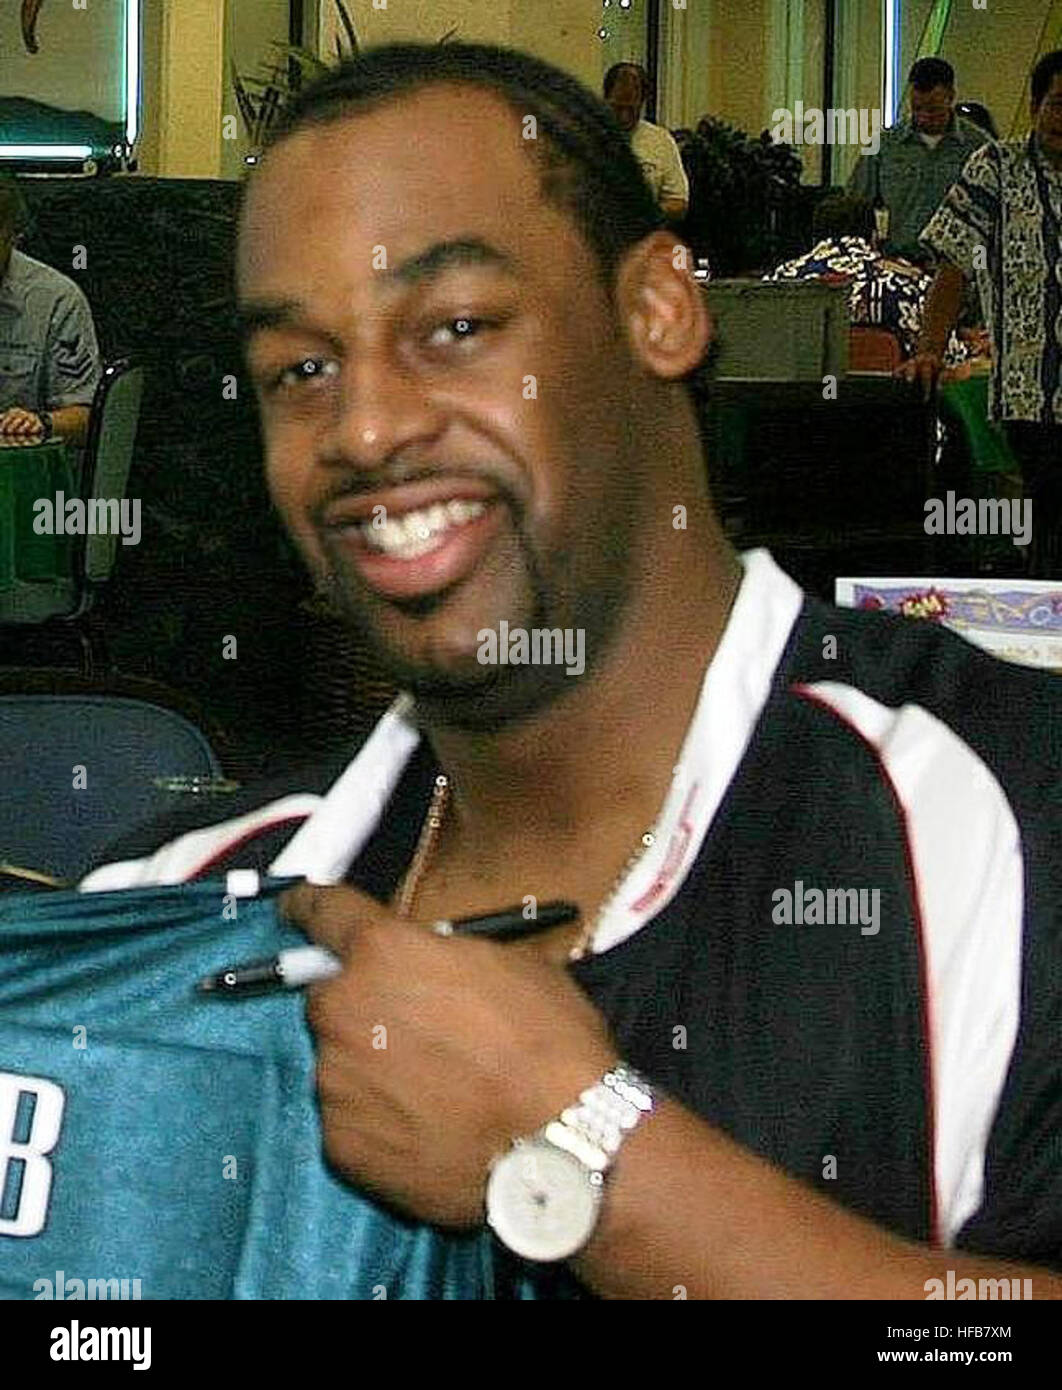 Philadelphia Eagles quarterback Donovan McNabb signed a football jersey belonging to Storekeeper 2nd Class Jason Winters of Fleet Industrial Supply Center, Pearl Harbor. McNabb visited the Silver Dolphin Bistro at Naval Station Pearl Harbor on Feb. 3 to meet with Sailors. (Photo by JO3 Corwin Colbert) Donovan McNabb crop Stock Photo